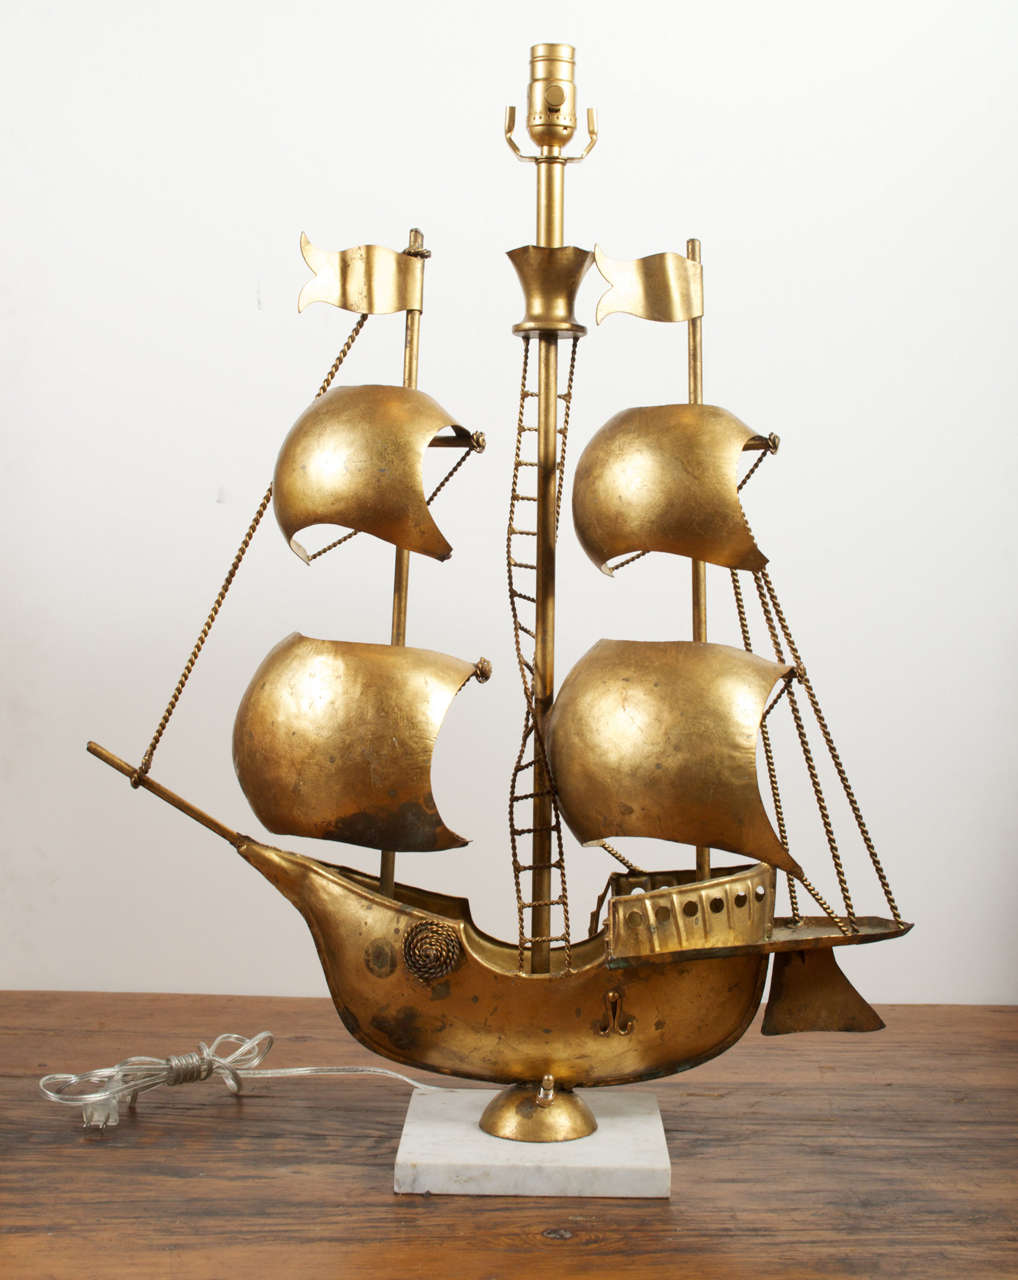 Painted metal pirate ship with white marble base. Single Edison socket and brass saddle to mount lamp shape.